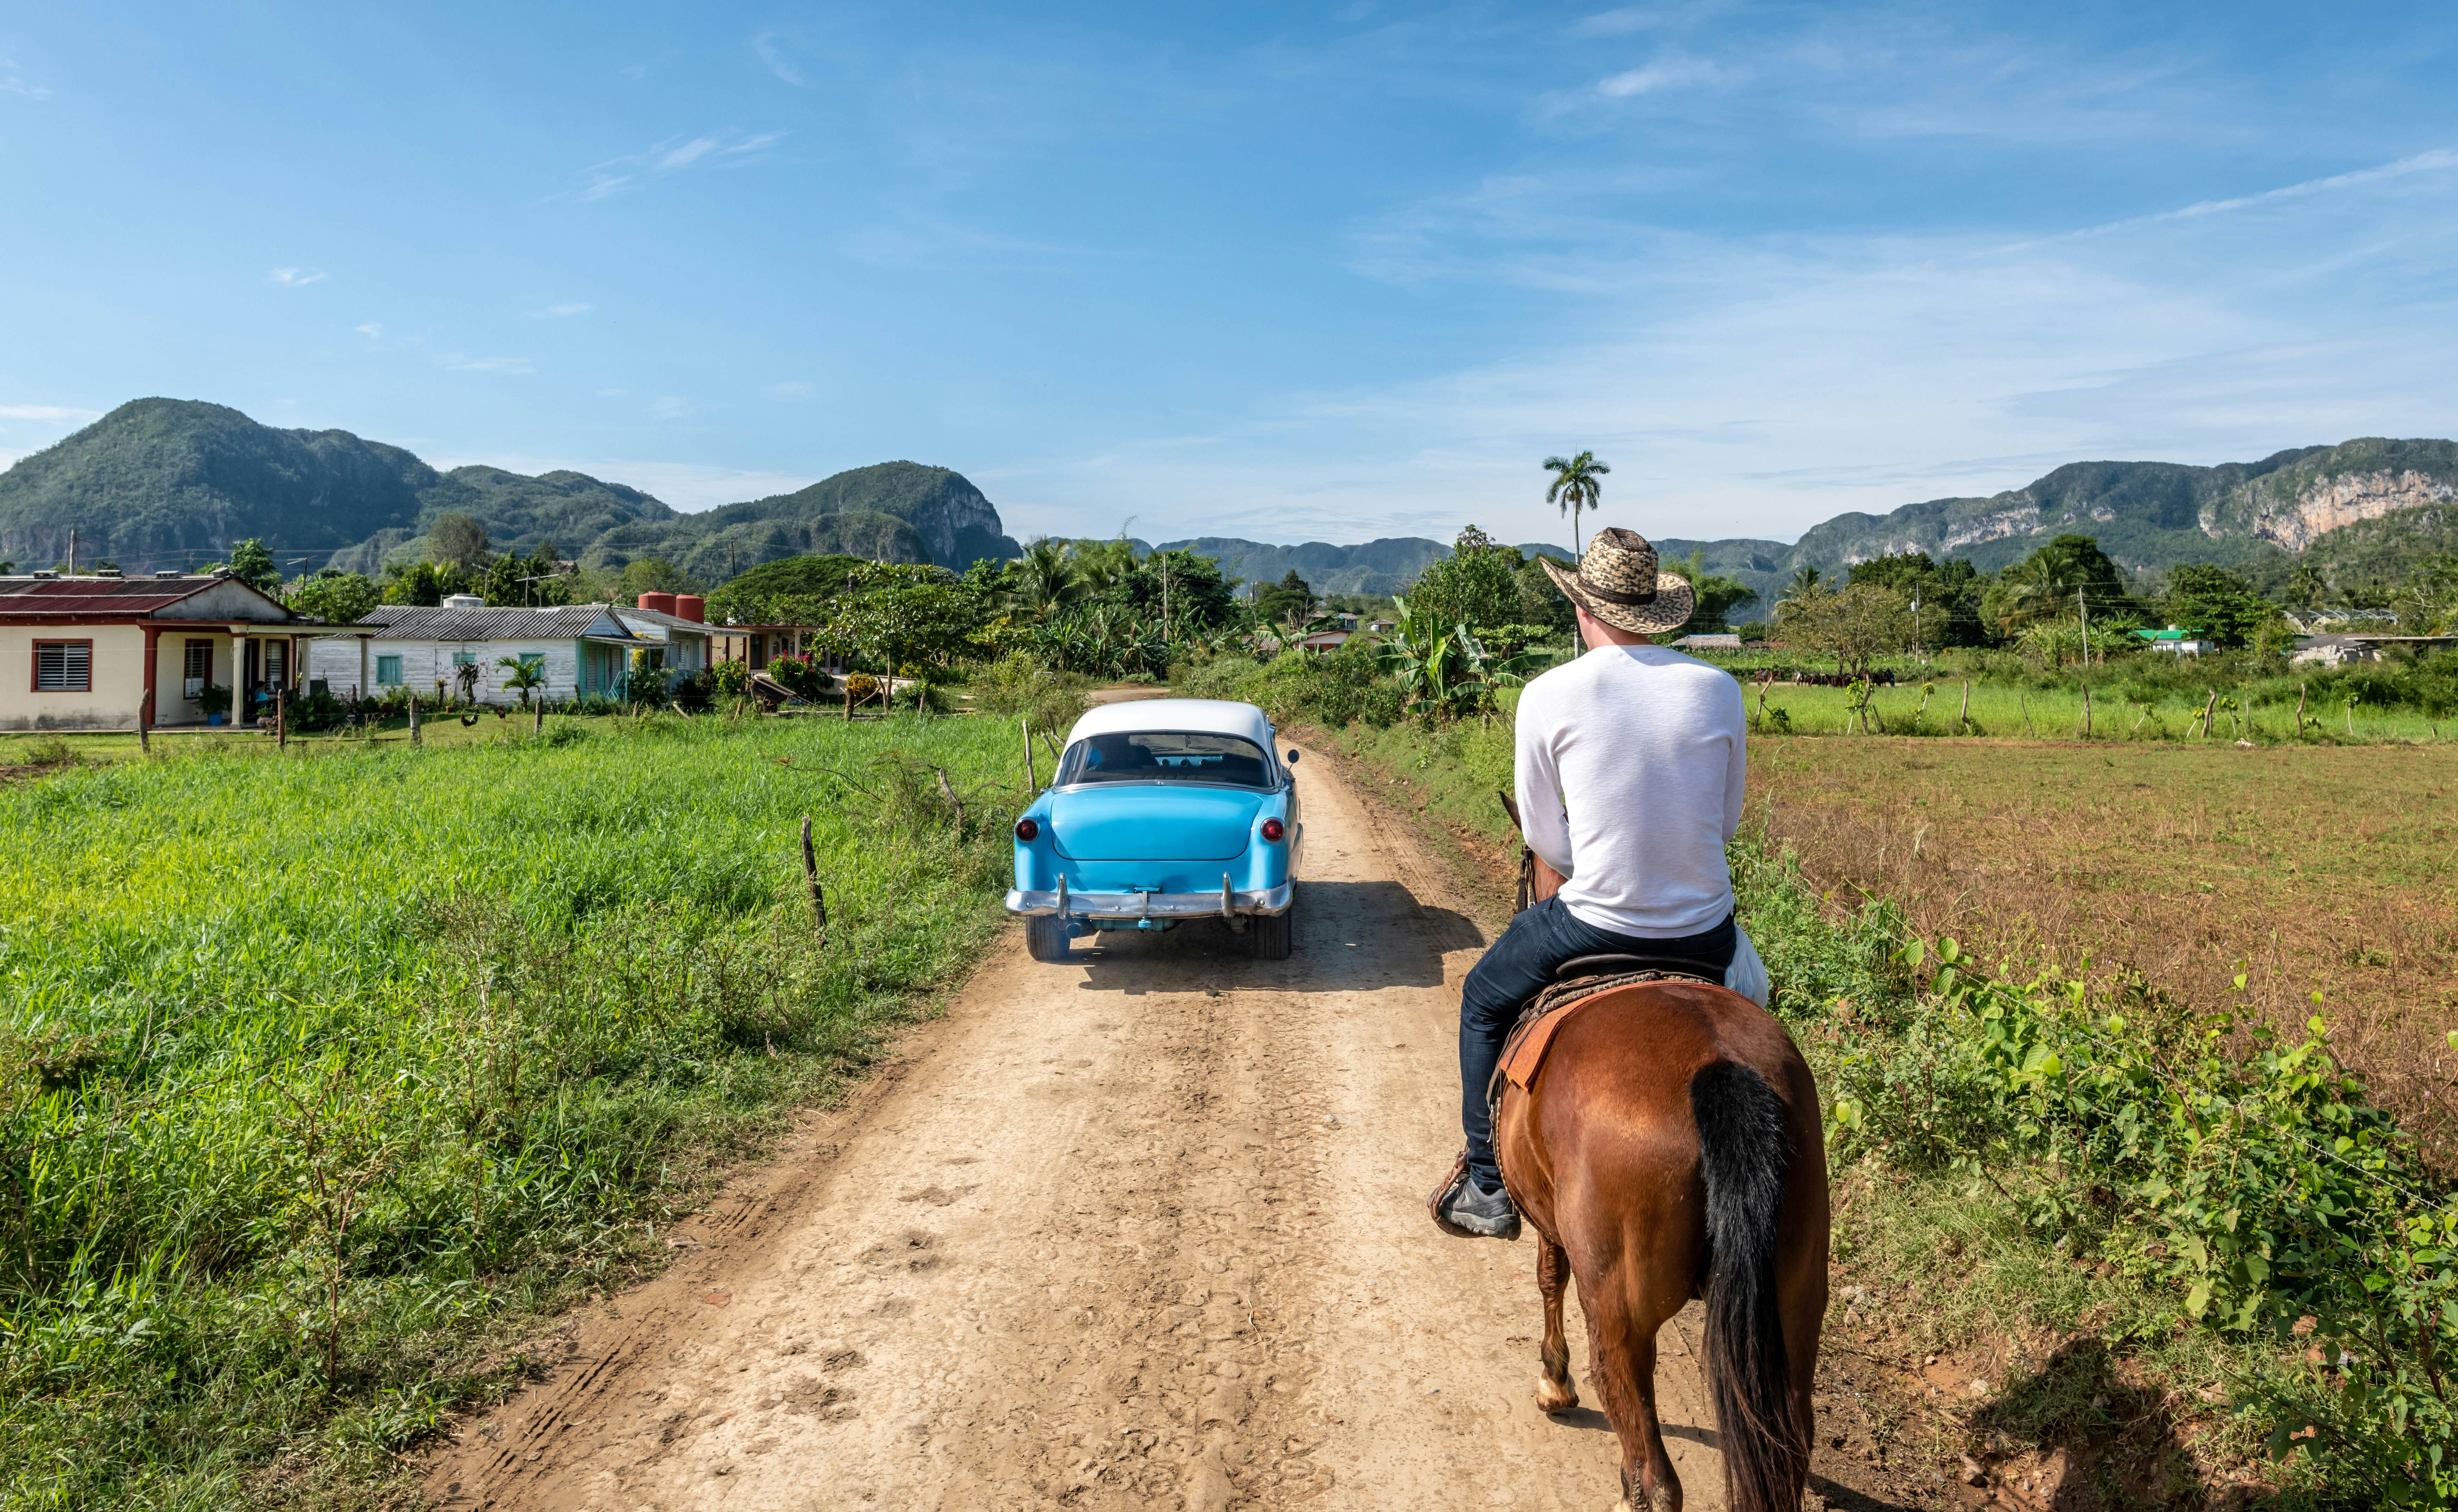 10 of the places to in Cuba - Lonely